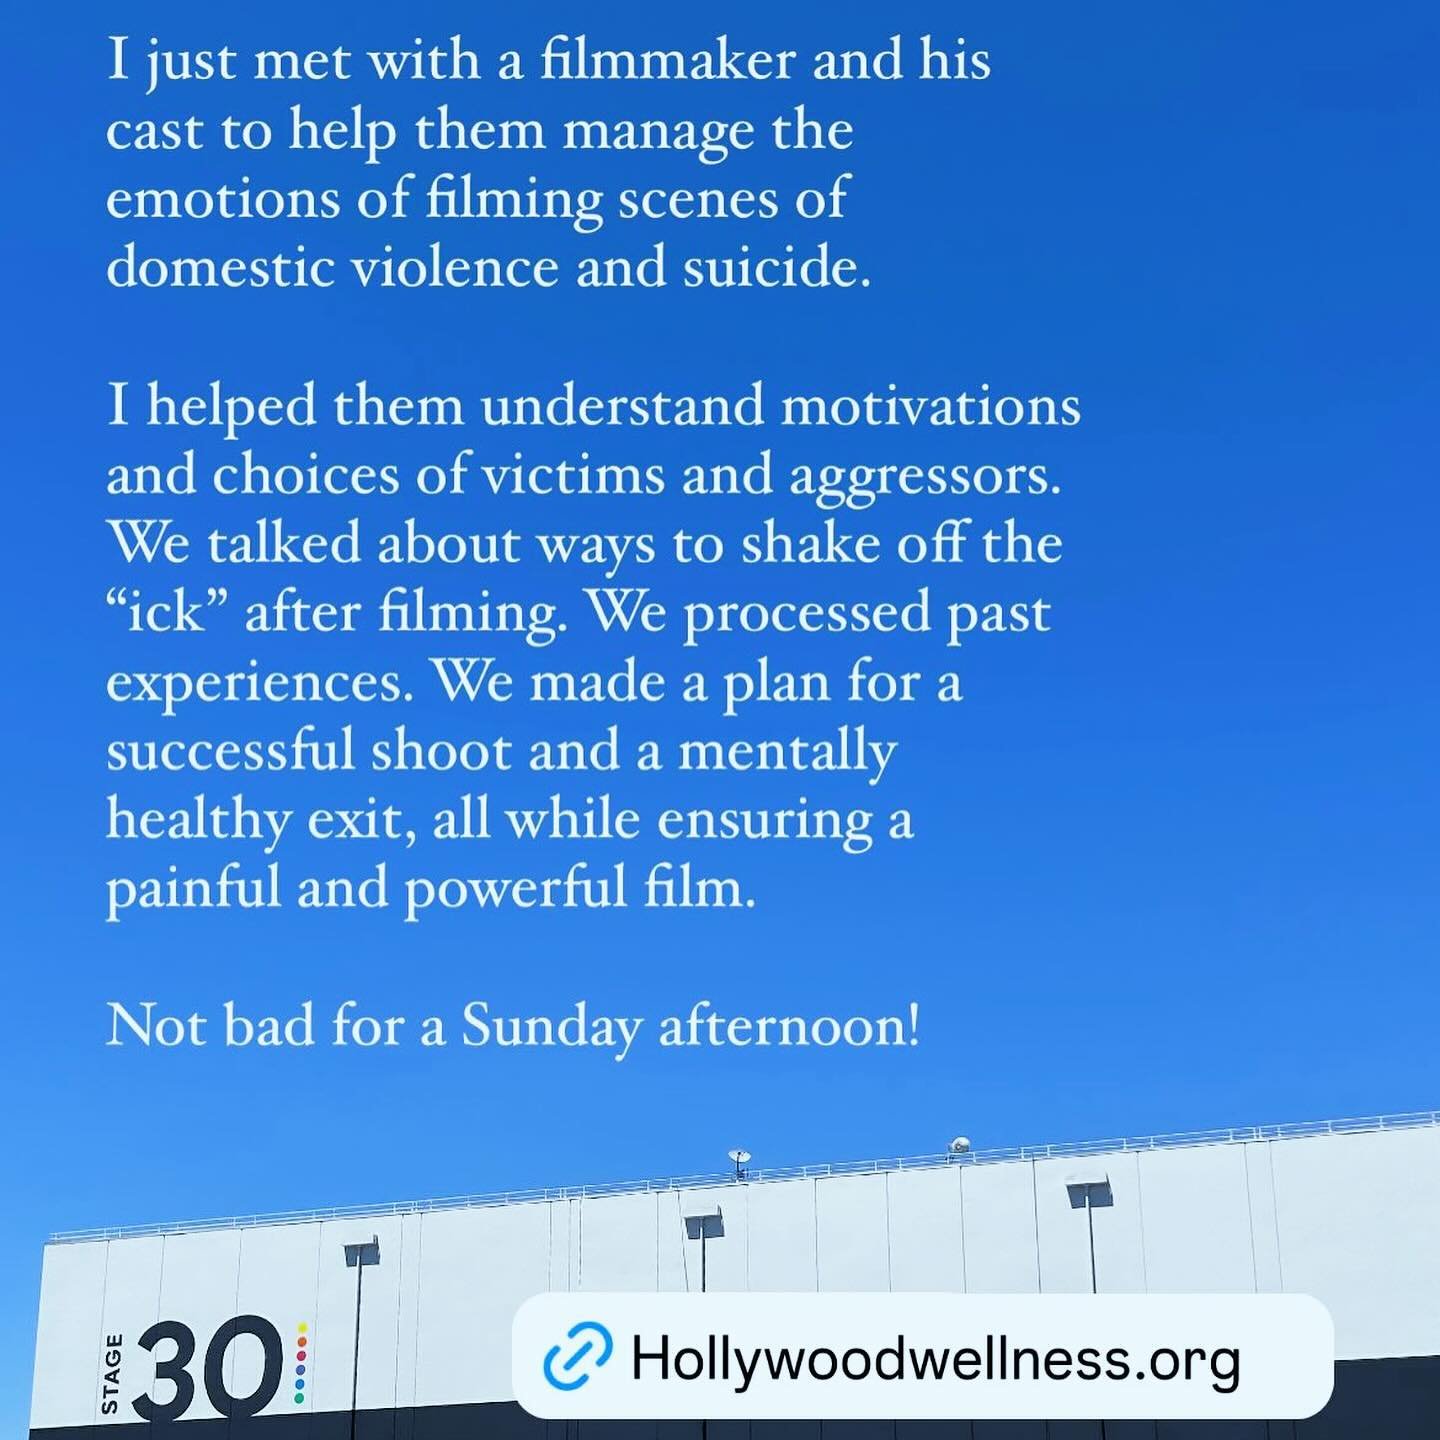 I just met with a #filmmaker and his #cast to help them manage the emotions of #filming scenes of domestic violence and suicide.

I helped them understand motivations and choices of victims and aggressors.
We talked about ways to shake off the
&ldquo